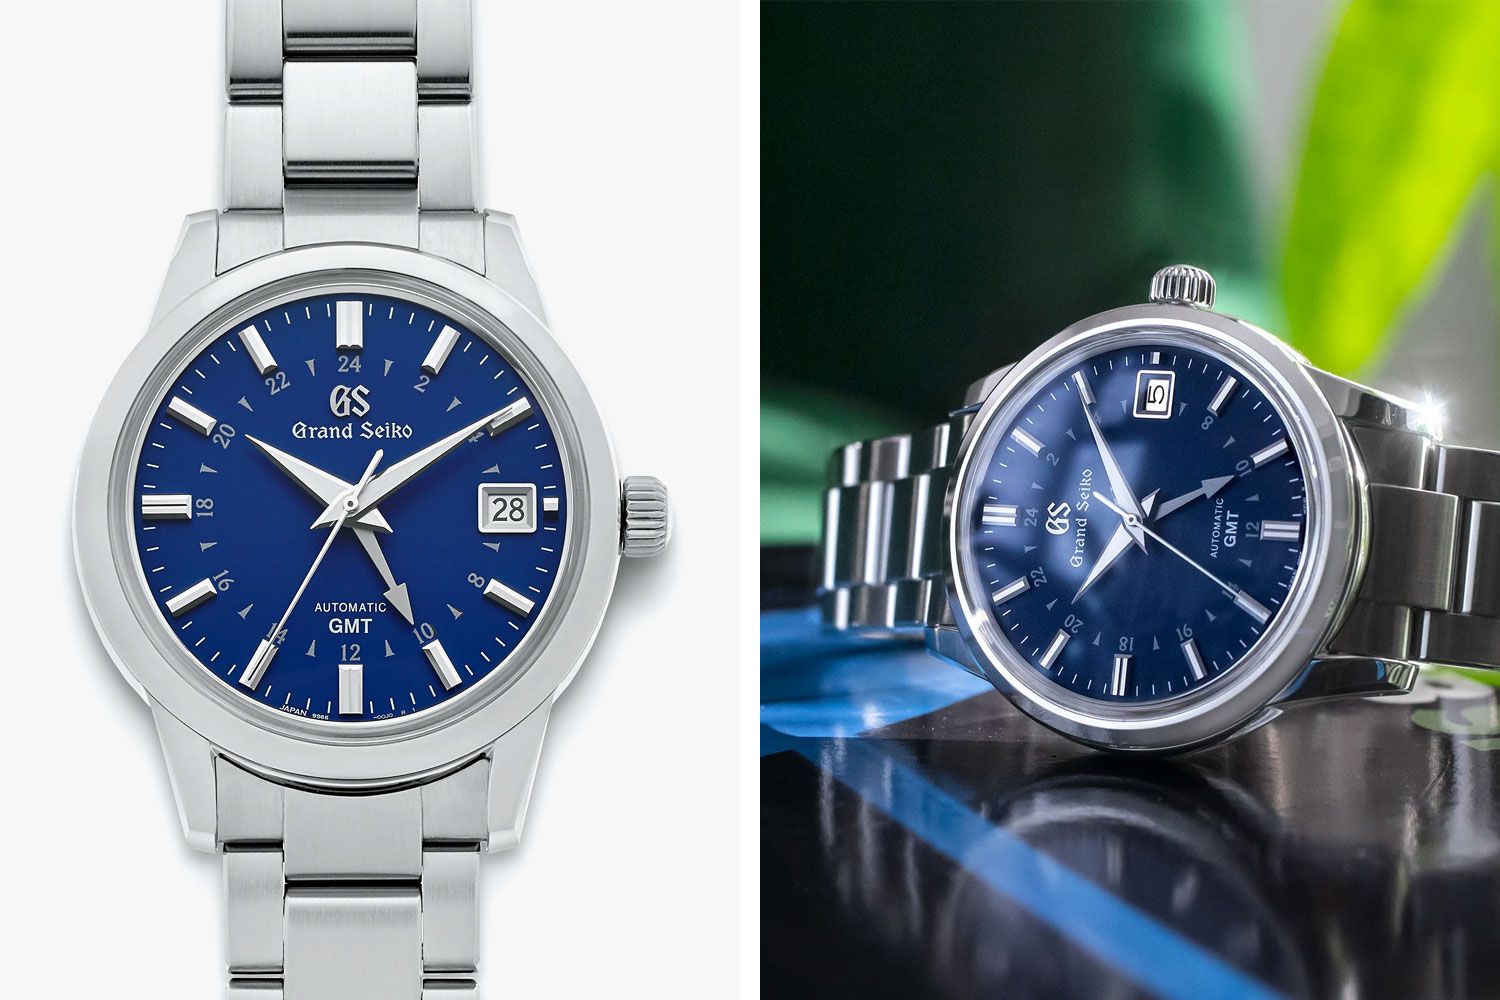 Grand Seiko Hodinkee LE GMT SBGM239 Used Watch For Sale | lupon.gov.ph